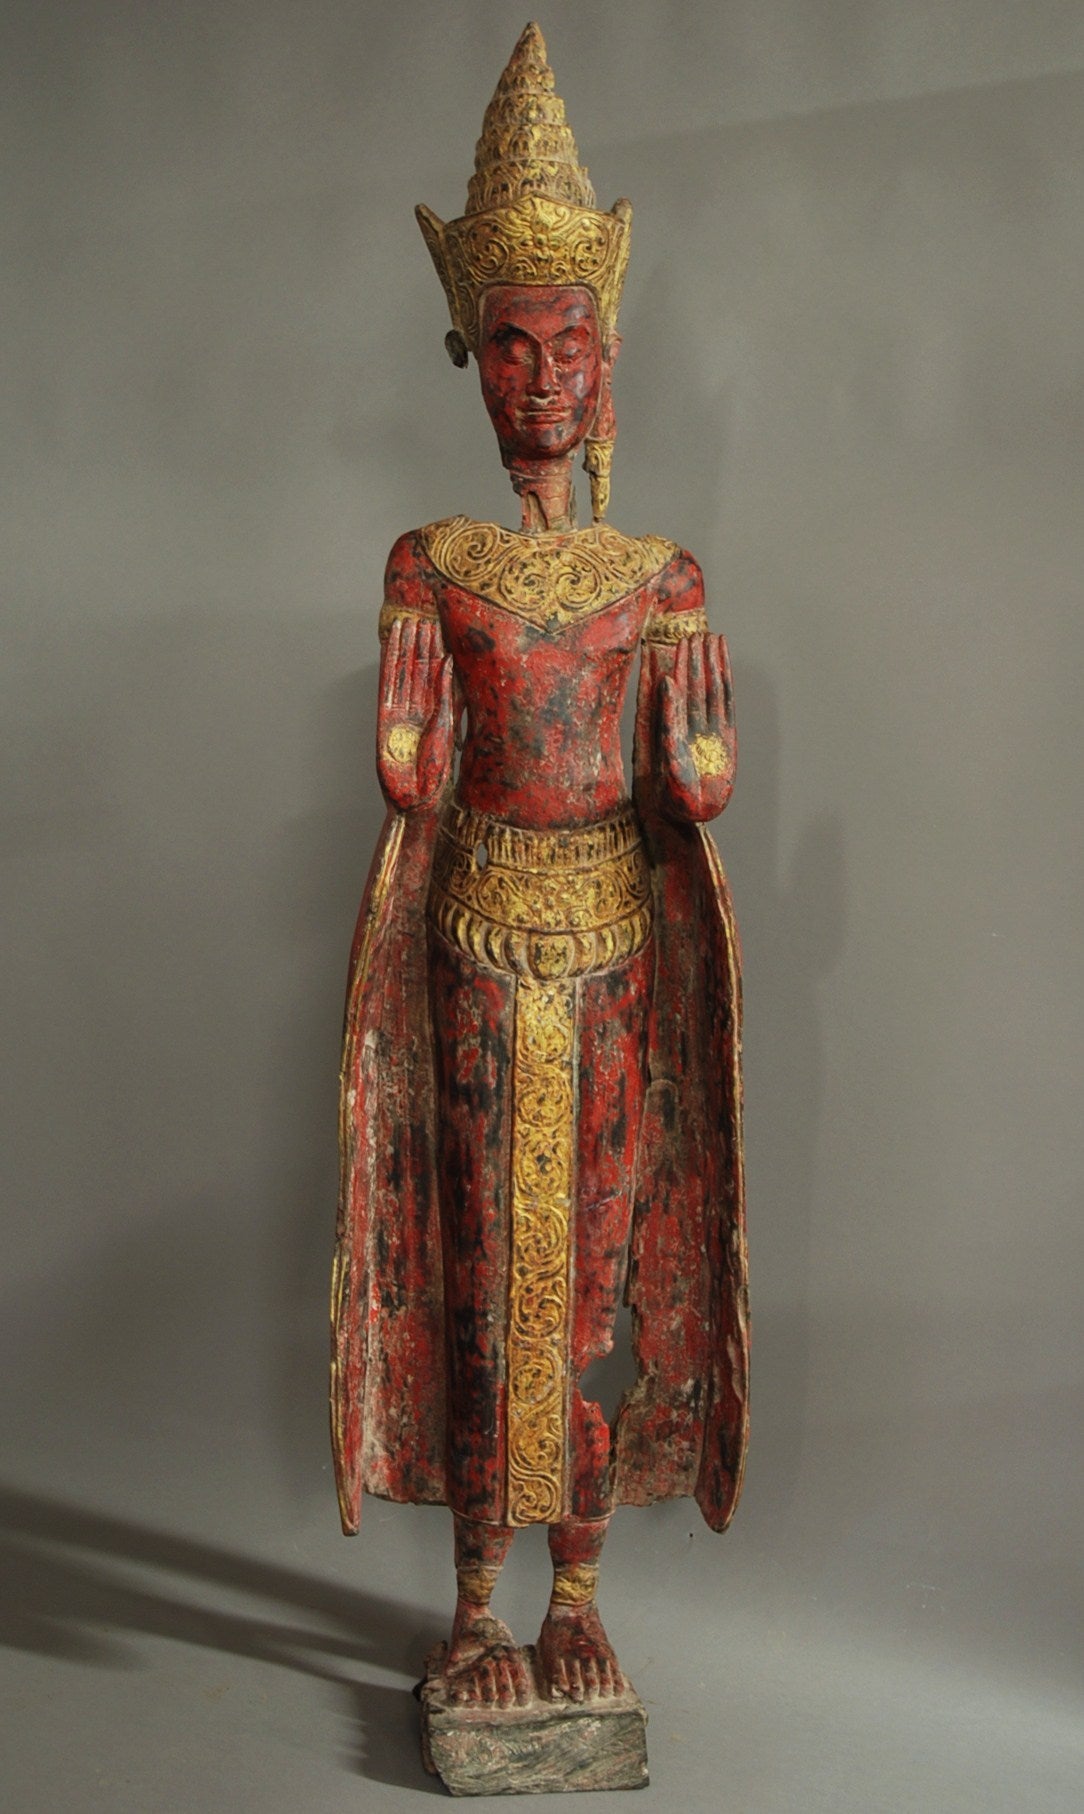 A highly decorative large early 20th century South Asian polychrome carved wooden figure of a Buddha, possibly Burmese.

The figure depicts a South Asian Buddha standing with arms outstretched and has a weathered appearance.

The carved wooden